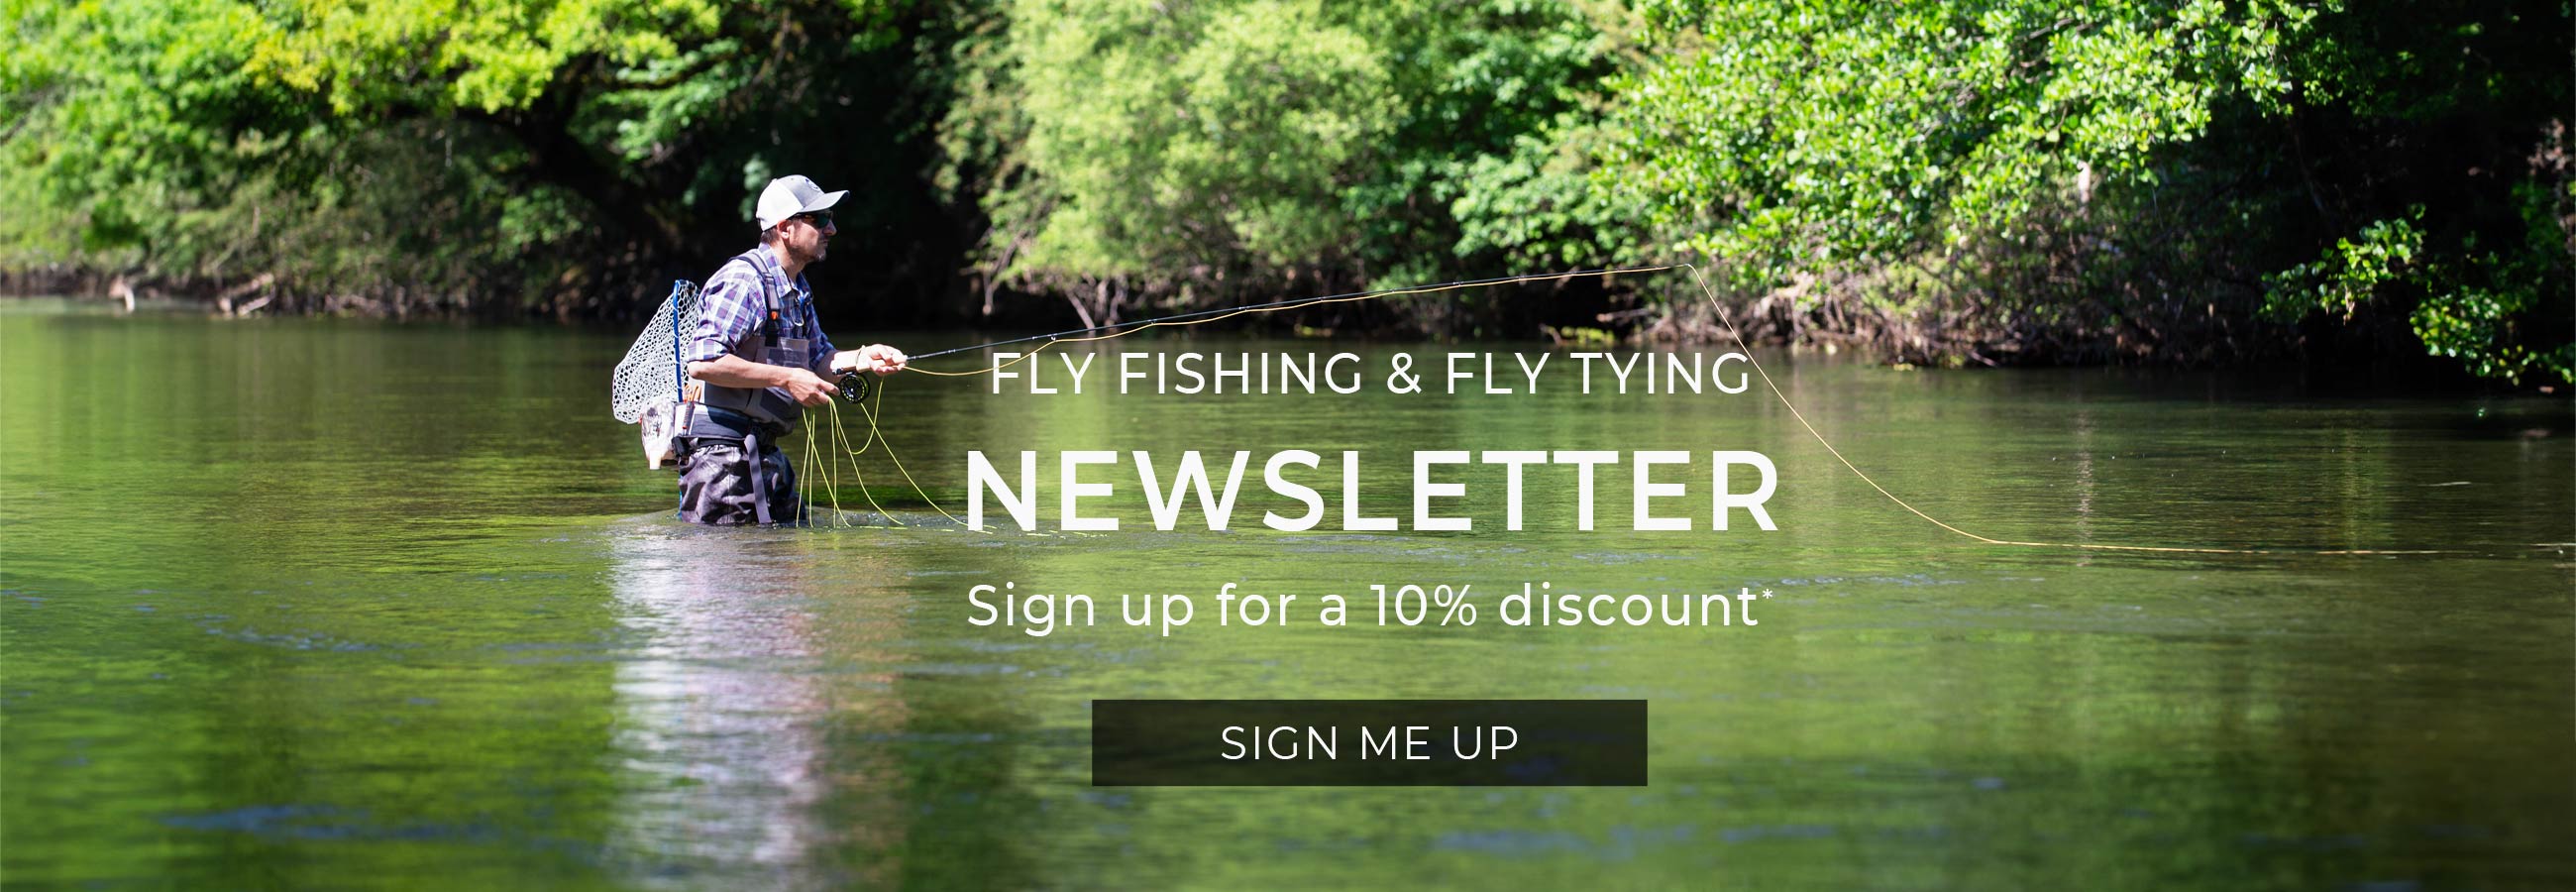 Sign up for the AOS Fly Fishing Newsletter and receive a 10% discount code for your next purchase